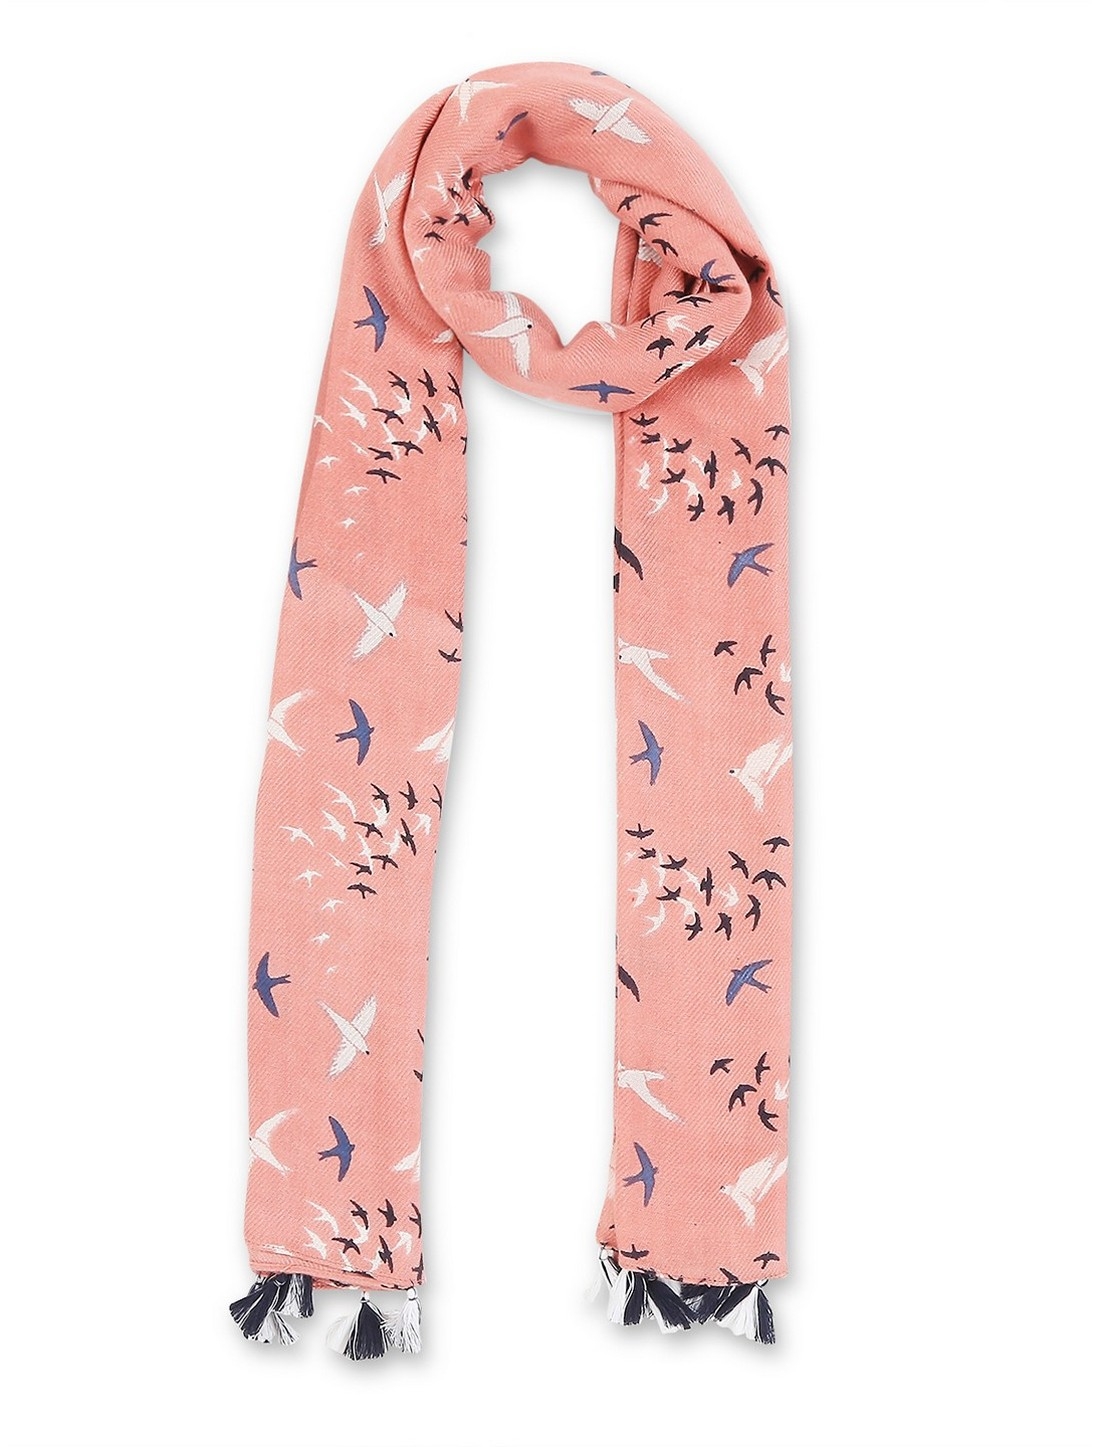 Get Wrapped | Get Wrapped Peach  Printed Scarves with Tassels for Women 3